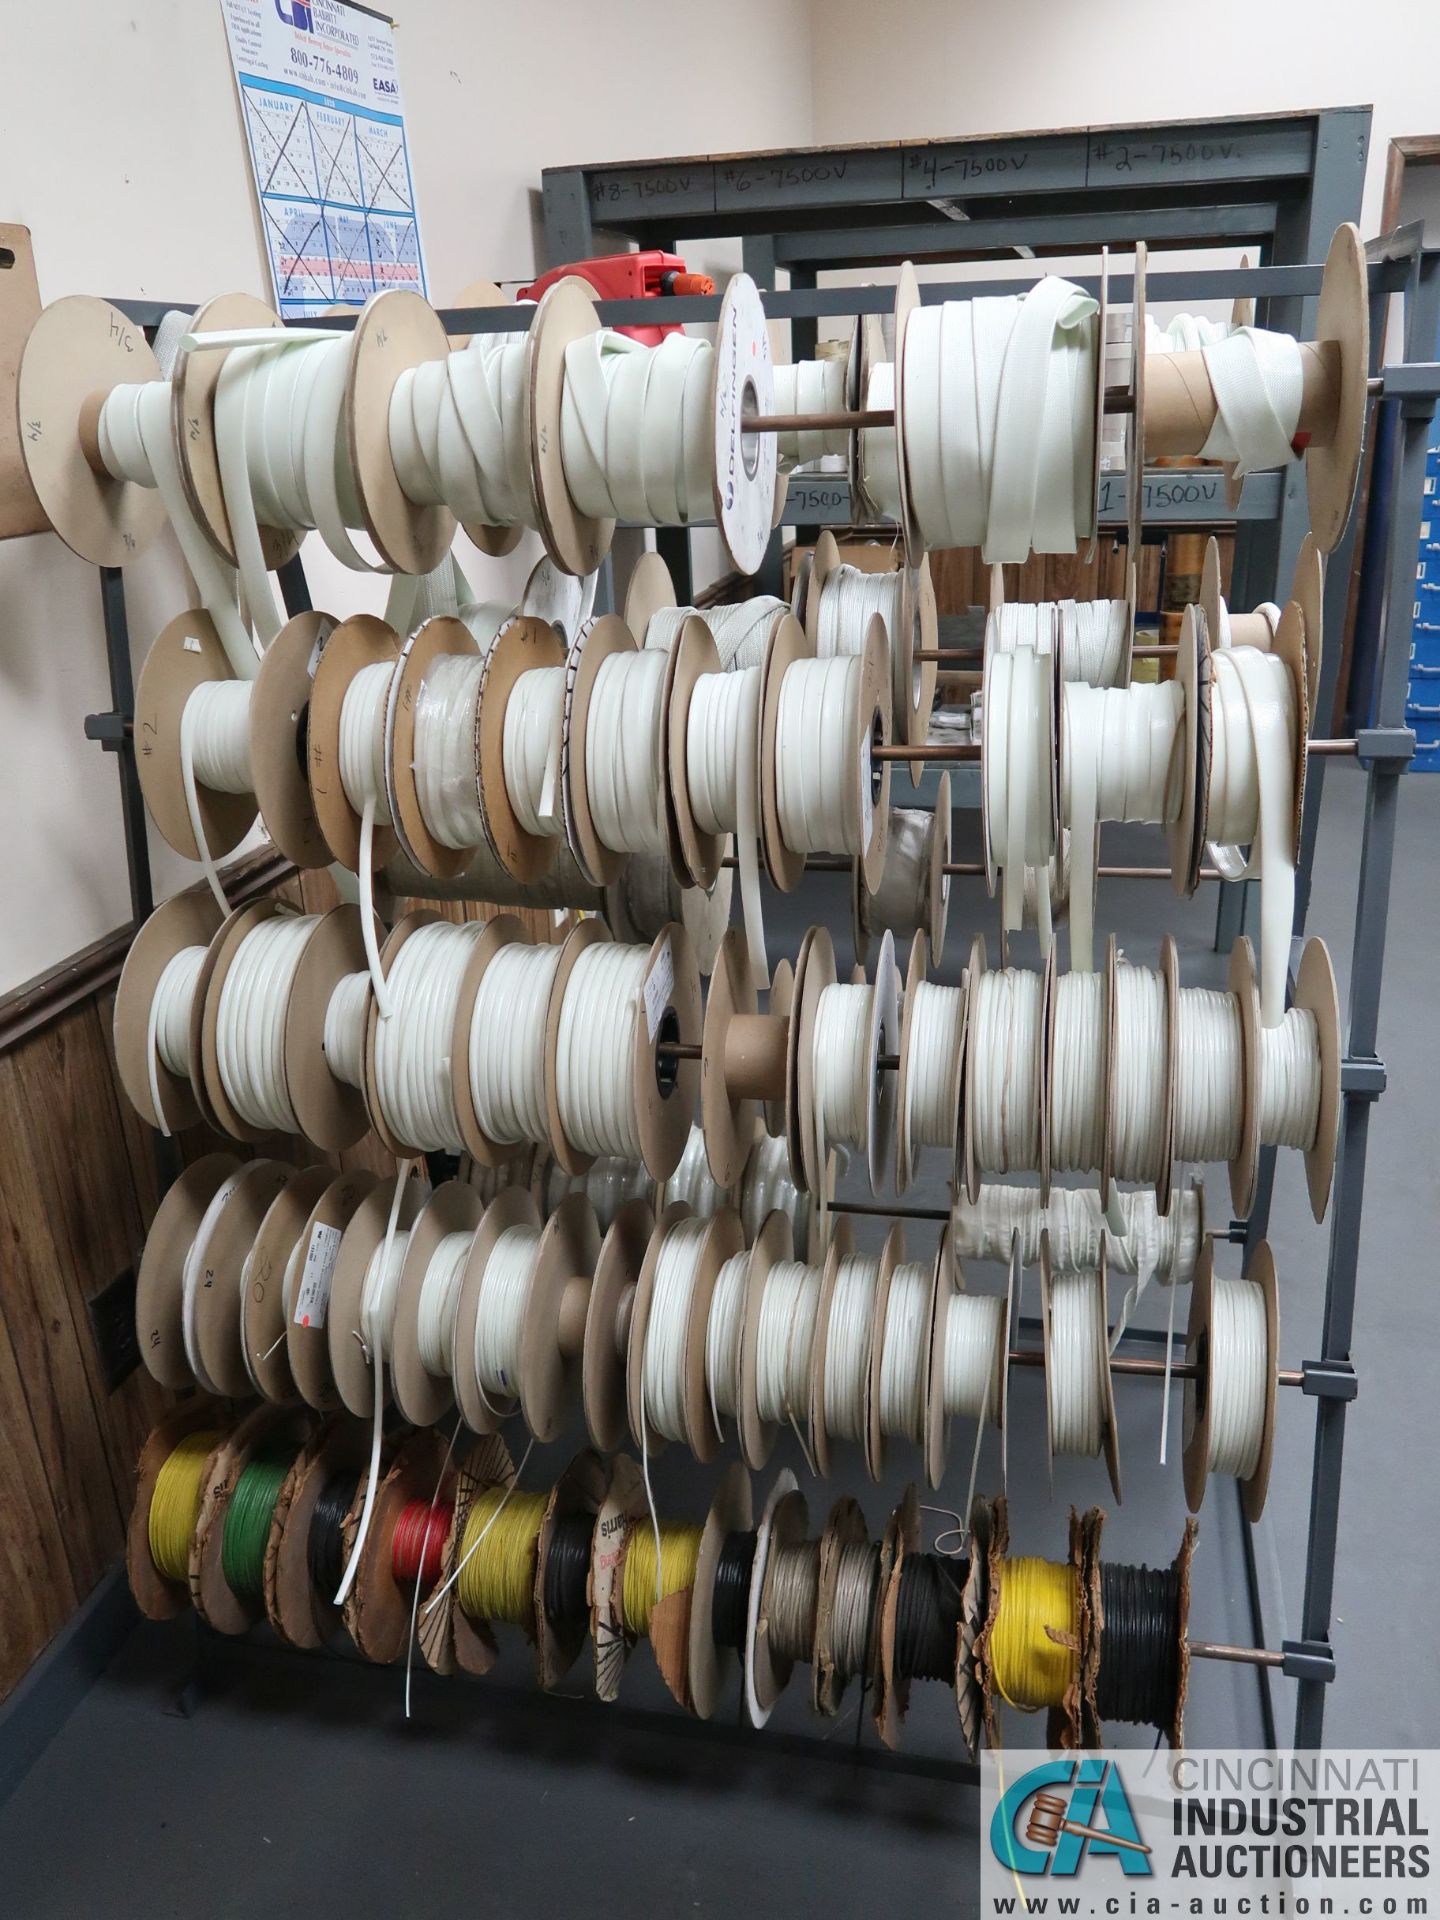 WIRE RACK WITH MISCELLANEOUS ROLLS OF WIRE INSULATION - Image 3 of 3